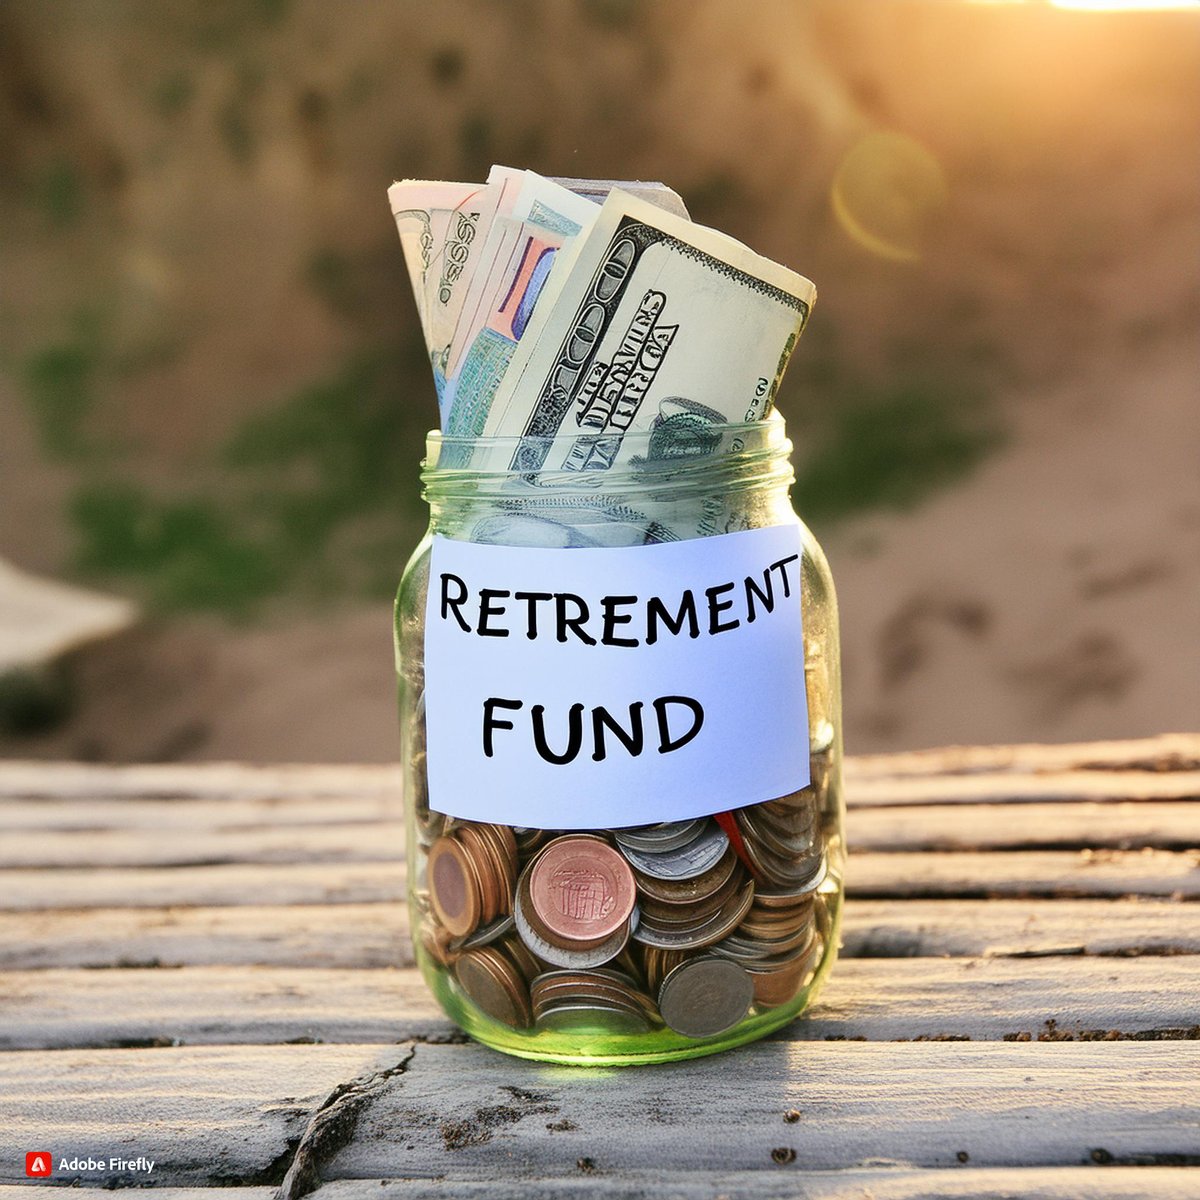 BlackRock has launched a new 401(k) plan that promises employees a degree of predictability, with retirement paychecks for life. Target-date funds embedded with annuities turn a portion of retirement savings into fixed lifetime payments. #retirementplanning #401k #fixedincome